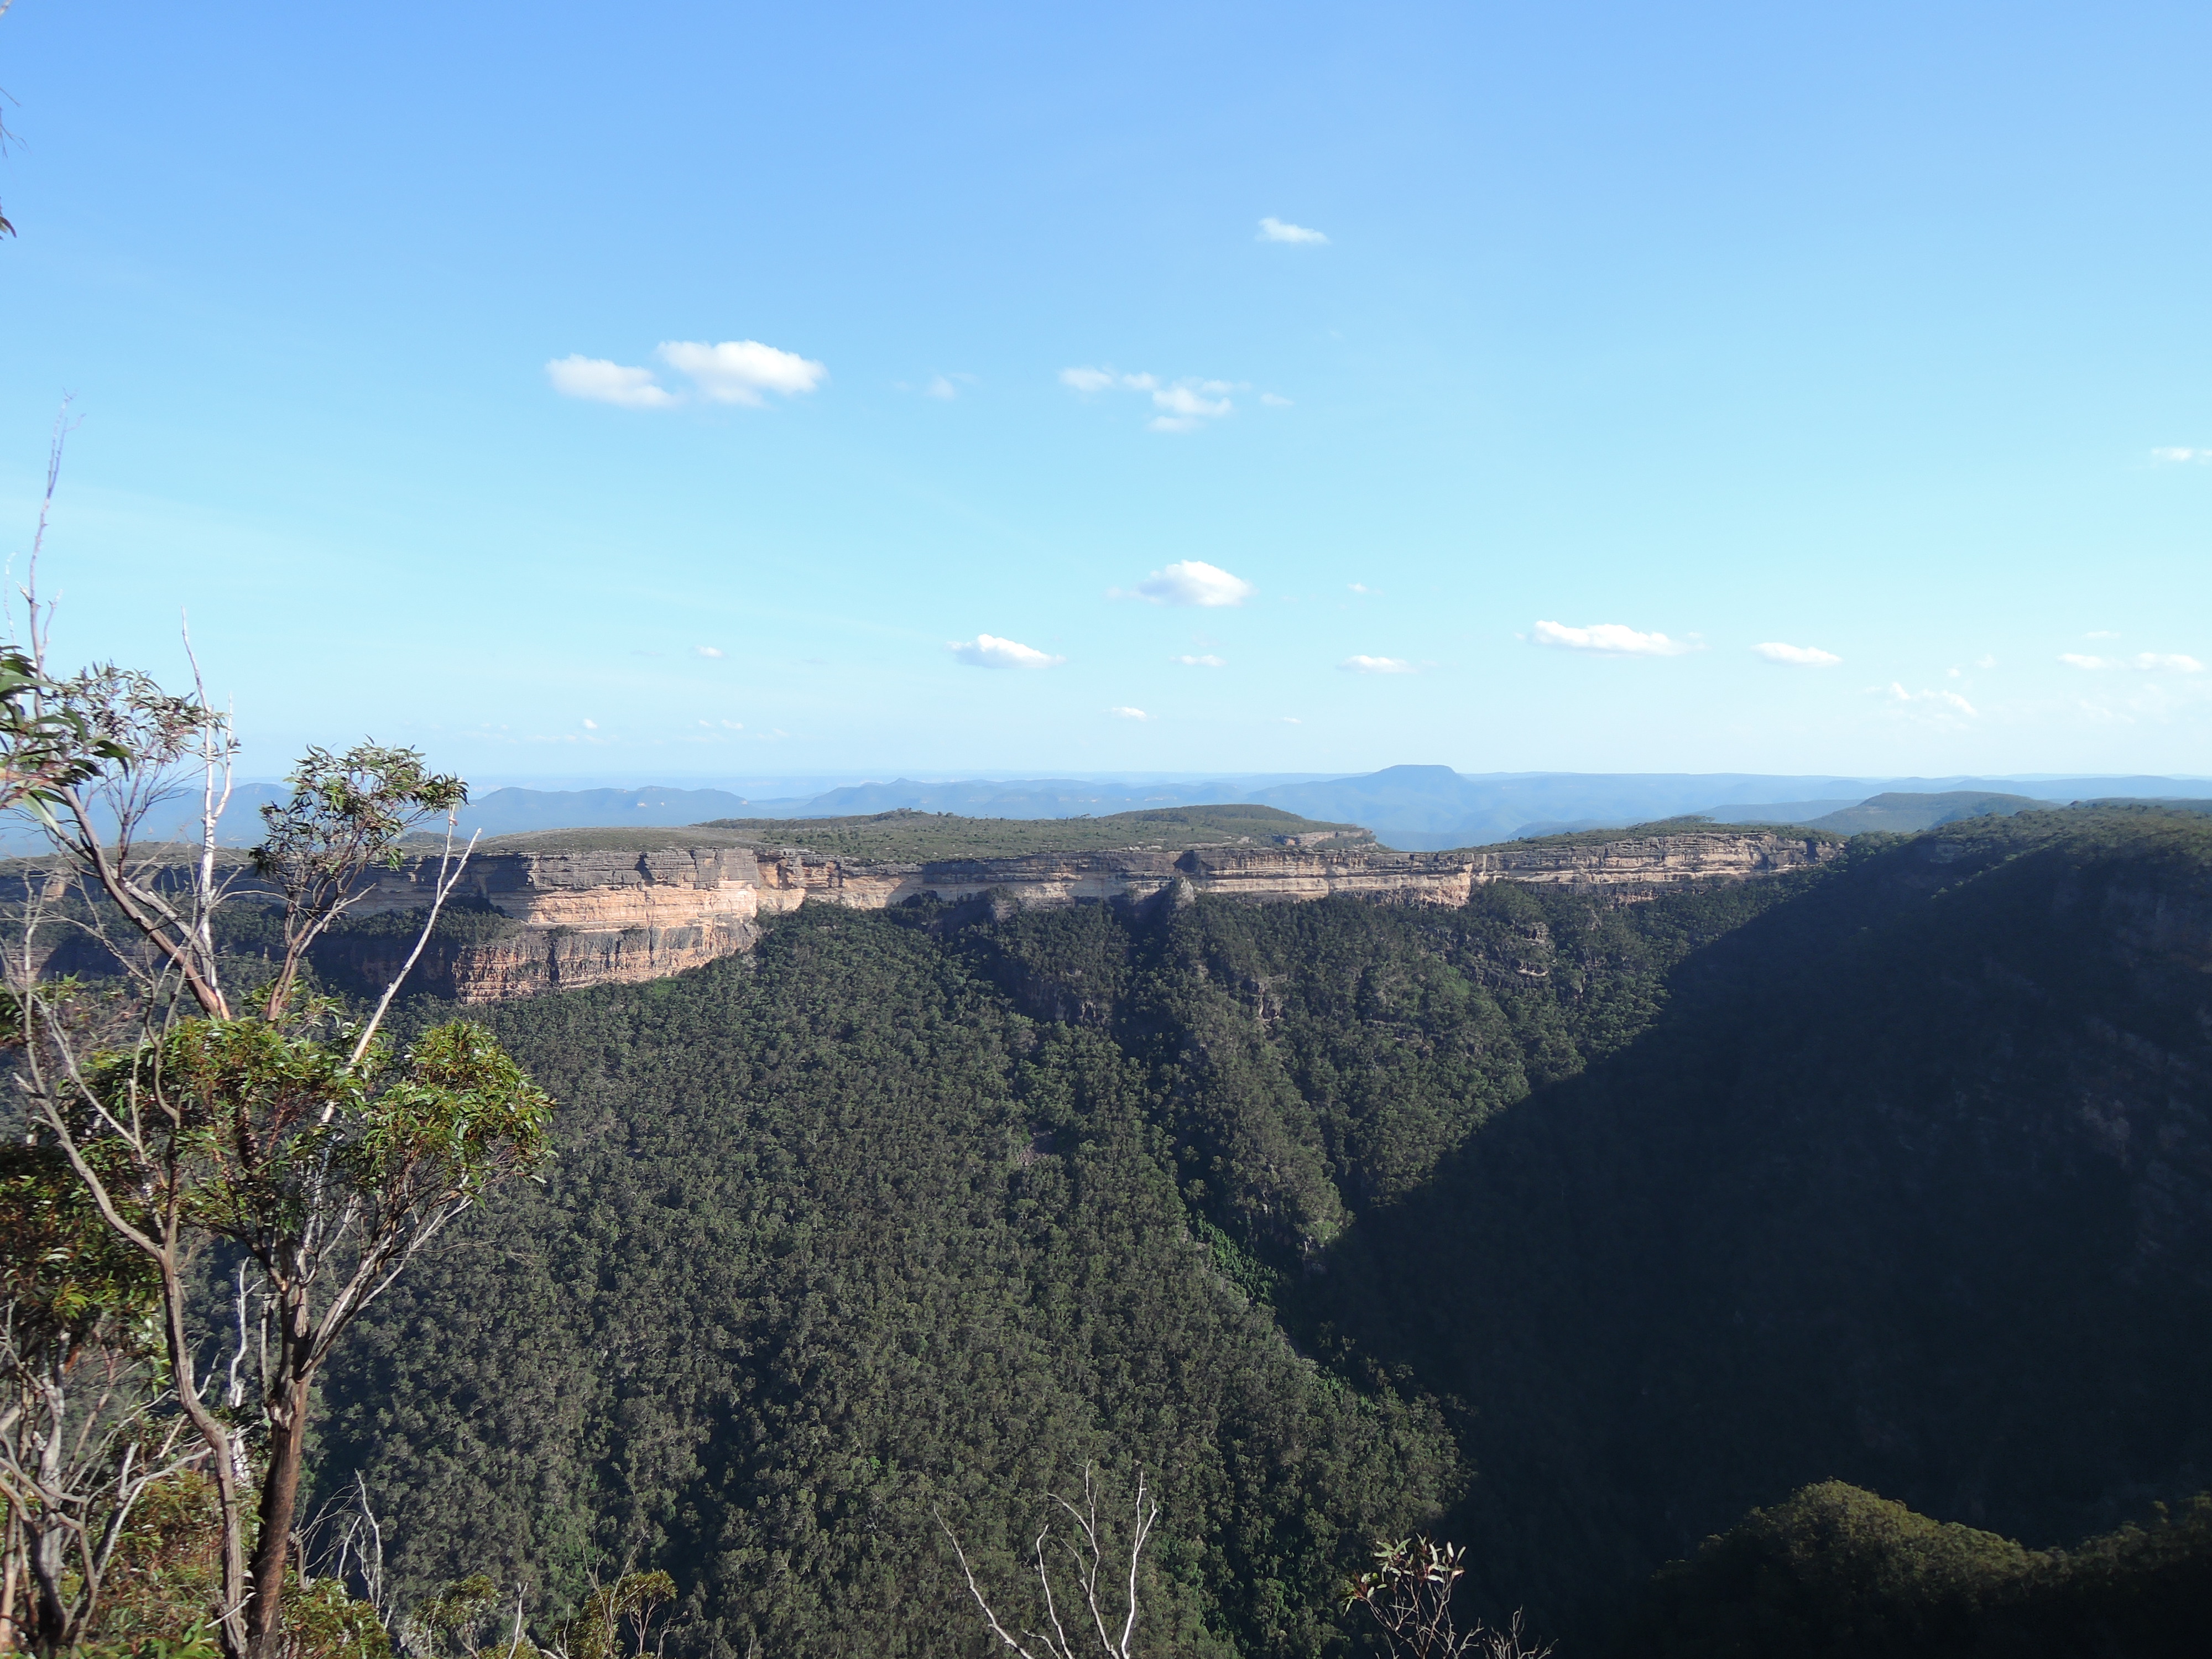 View from Spire Head towards Kanangra Walls Lookout, with Kalang Falls on the right